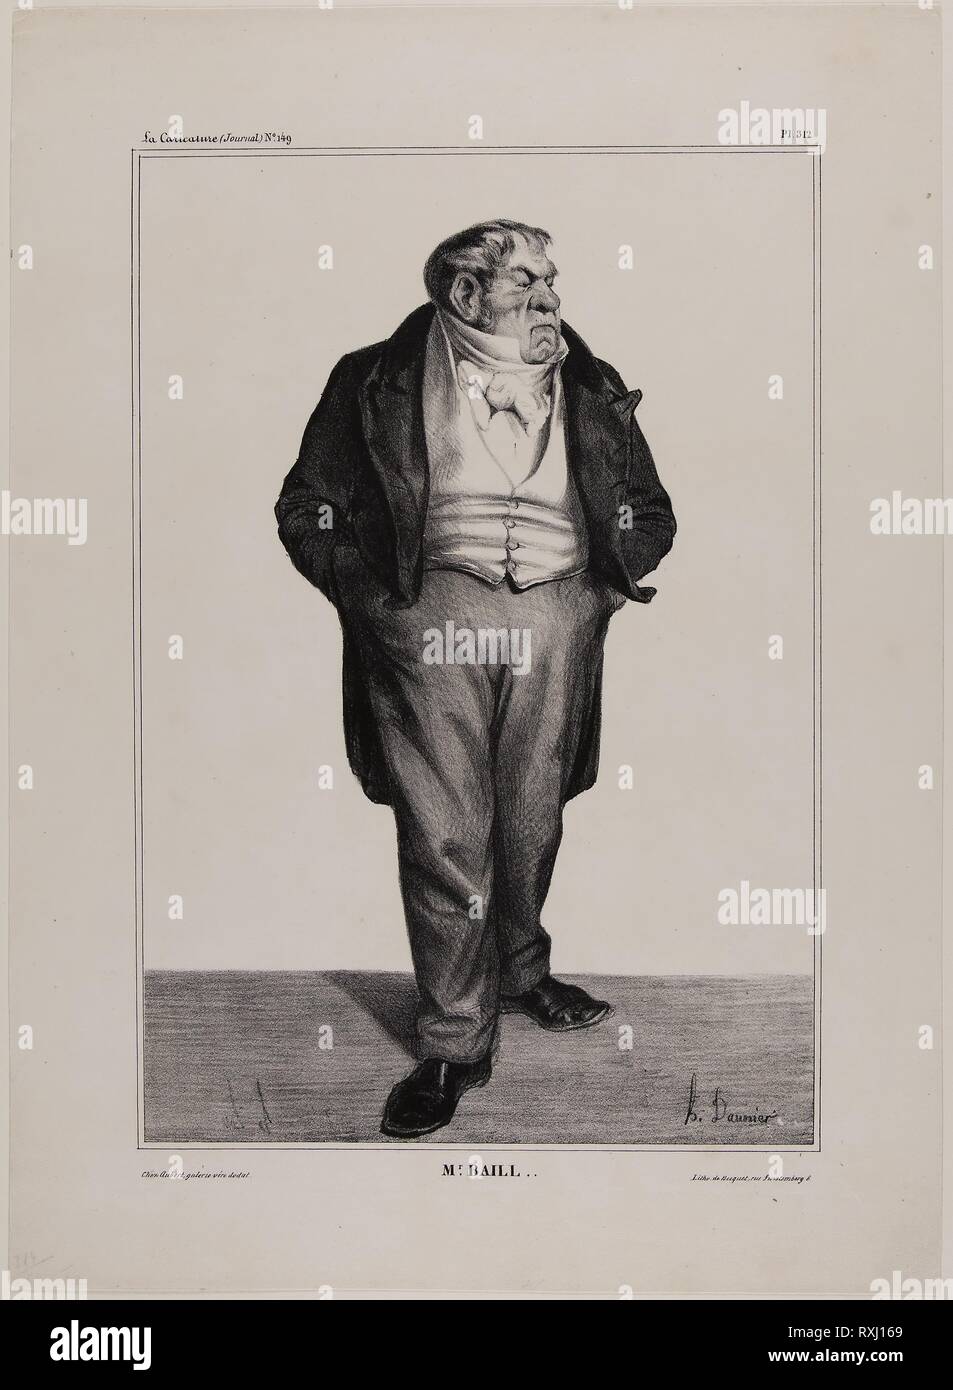 Mr. Baill.., plate 312 from Célébrités de la Caricature. Honoré Victorin Daumier; French, 1808-1879. Date: 1833. Dimensions: 283 × 192 mm (image); 362 × 263 mm (sheet). Lithograph in black on ivory wove paper. Origin: France. Museum: The Chicago Art Institute. Stock Photo